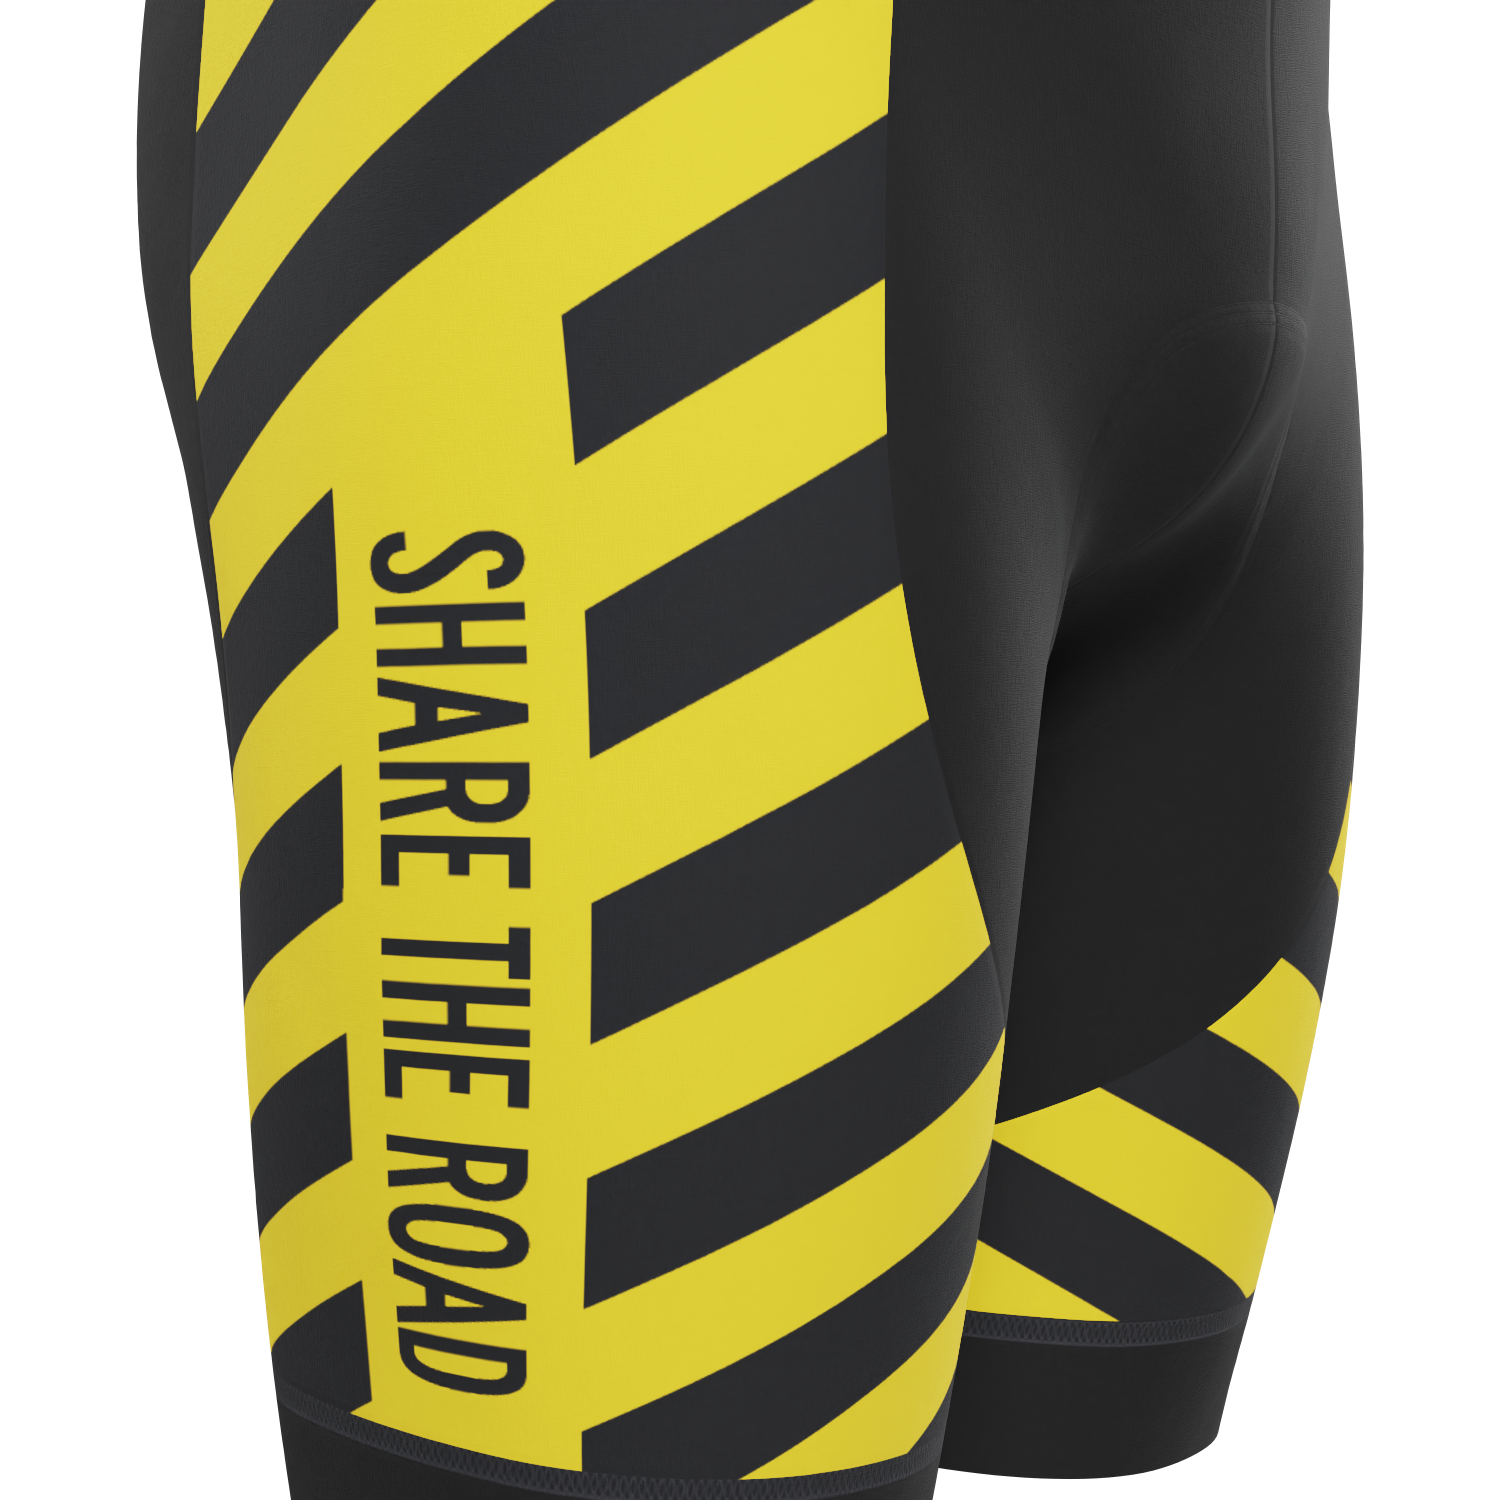 Men's Caution Share The Road Gel Padded Cycling Shorts